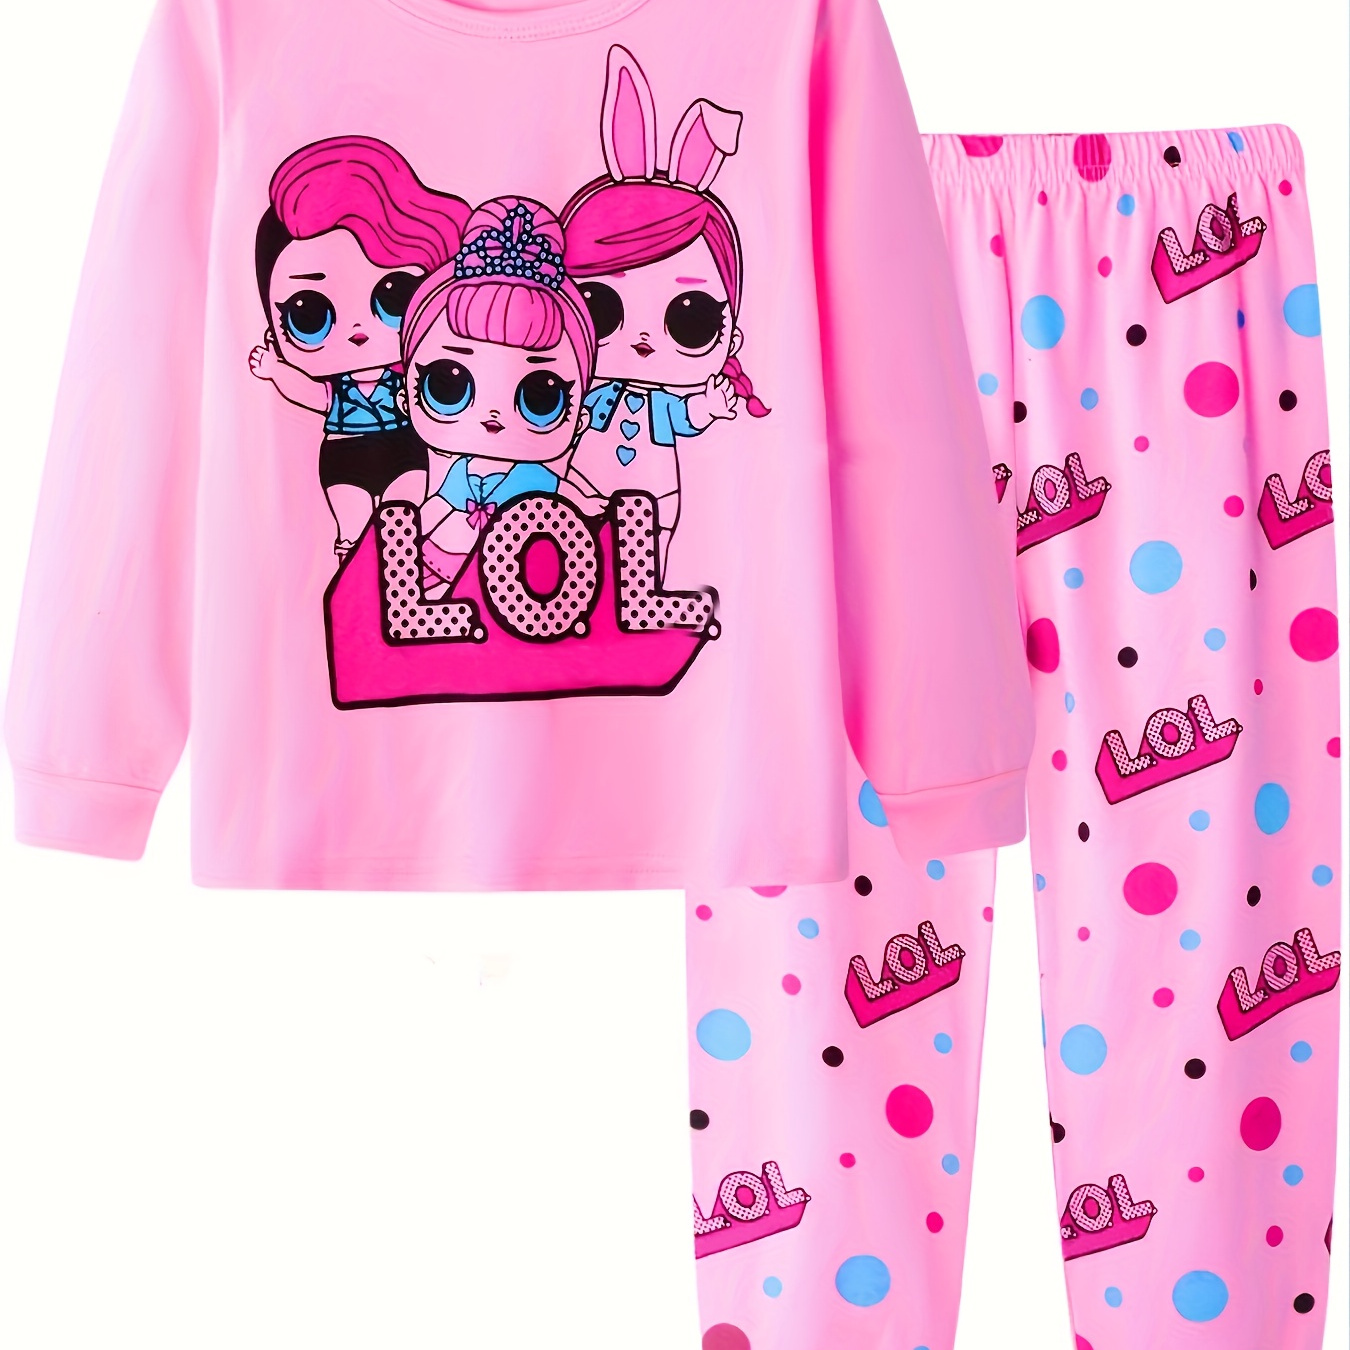 

Toddler Girls 2-piece Cotton Pajama Sets Cartoon Girls Pattern Round Neck Long Sleeve Top & Full Print Trousers Casual Pj Sets For All Seasons